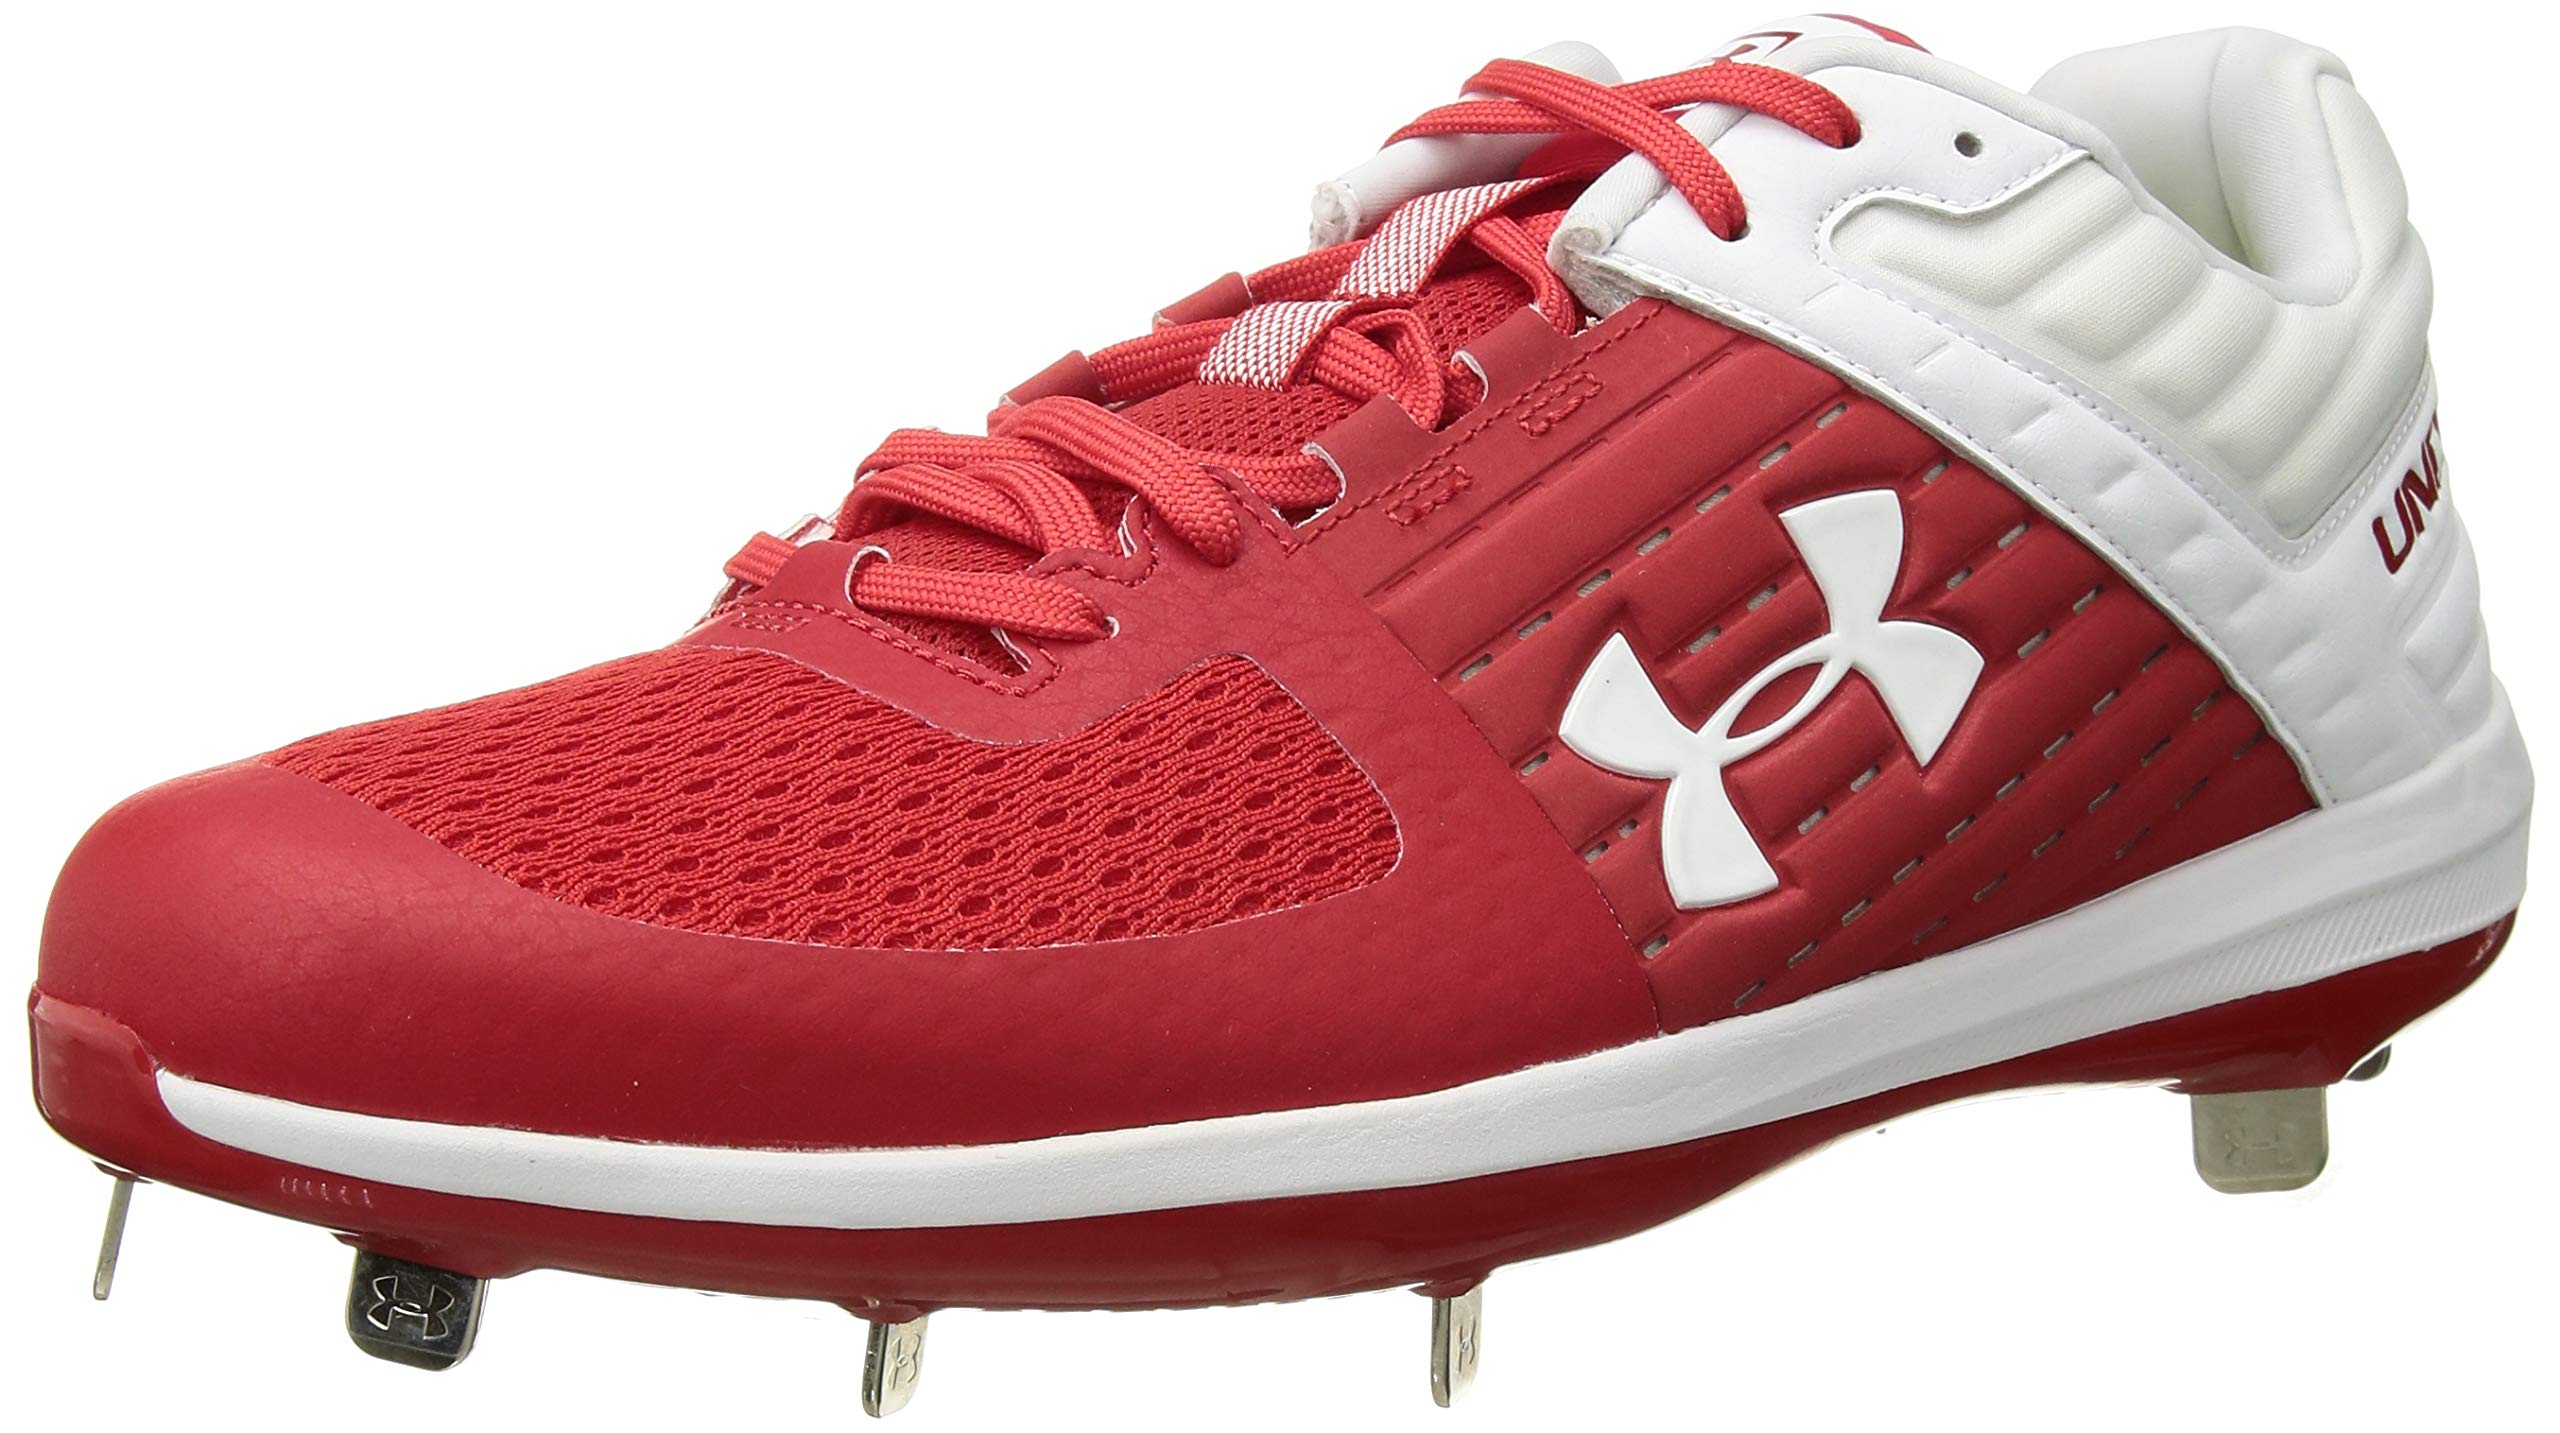 Under Armour Men's Yard Low ST Baseball Shoe, Red (601)/White, 16